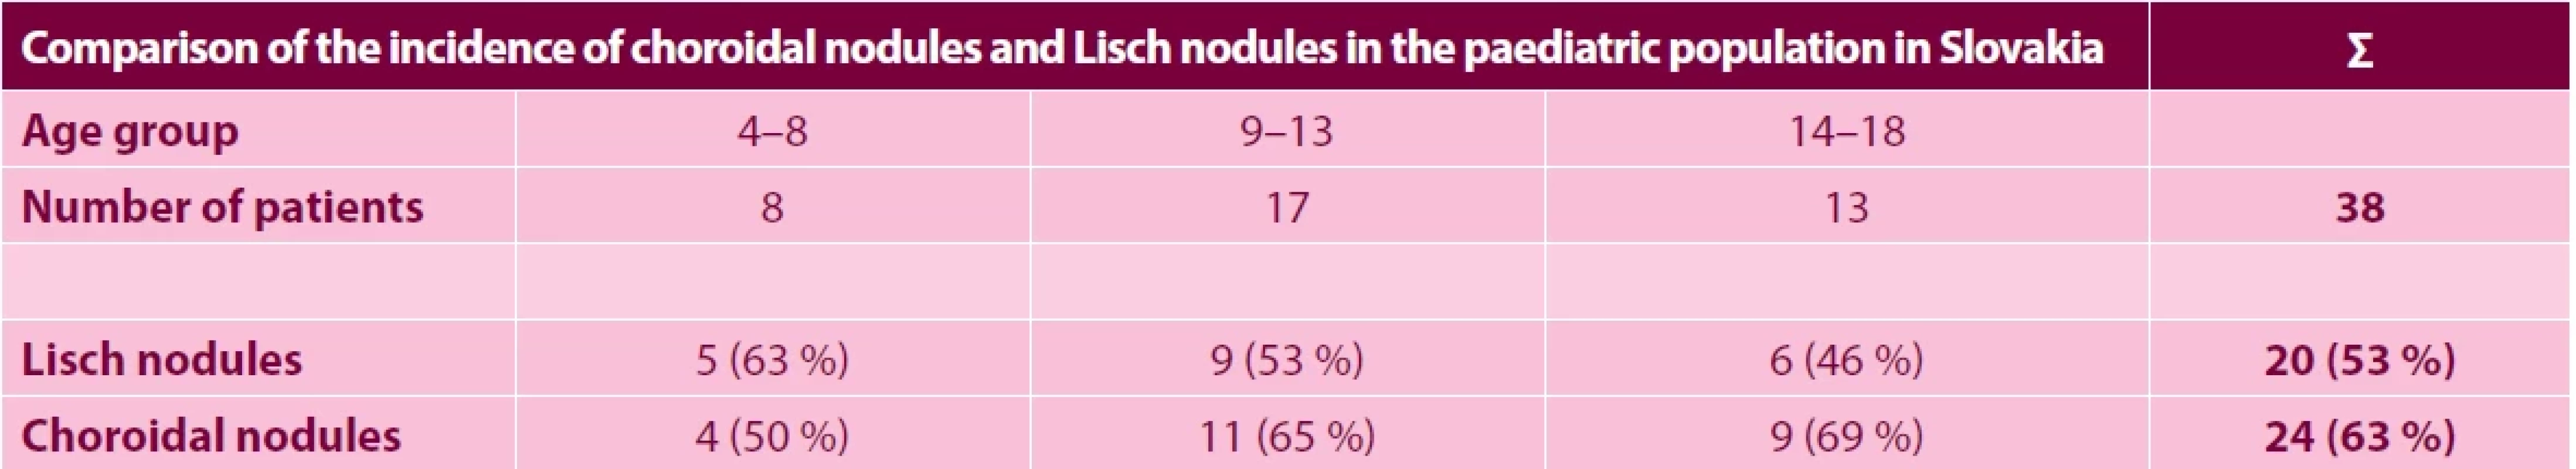 Results of a comparison of the incidence of choroidal nodules and Lisch nodules in the pediatric population in Slovakia